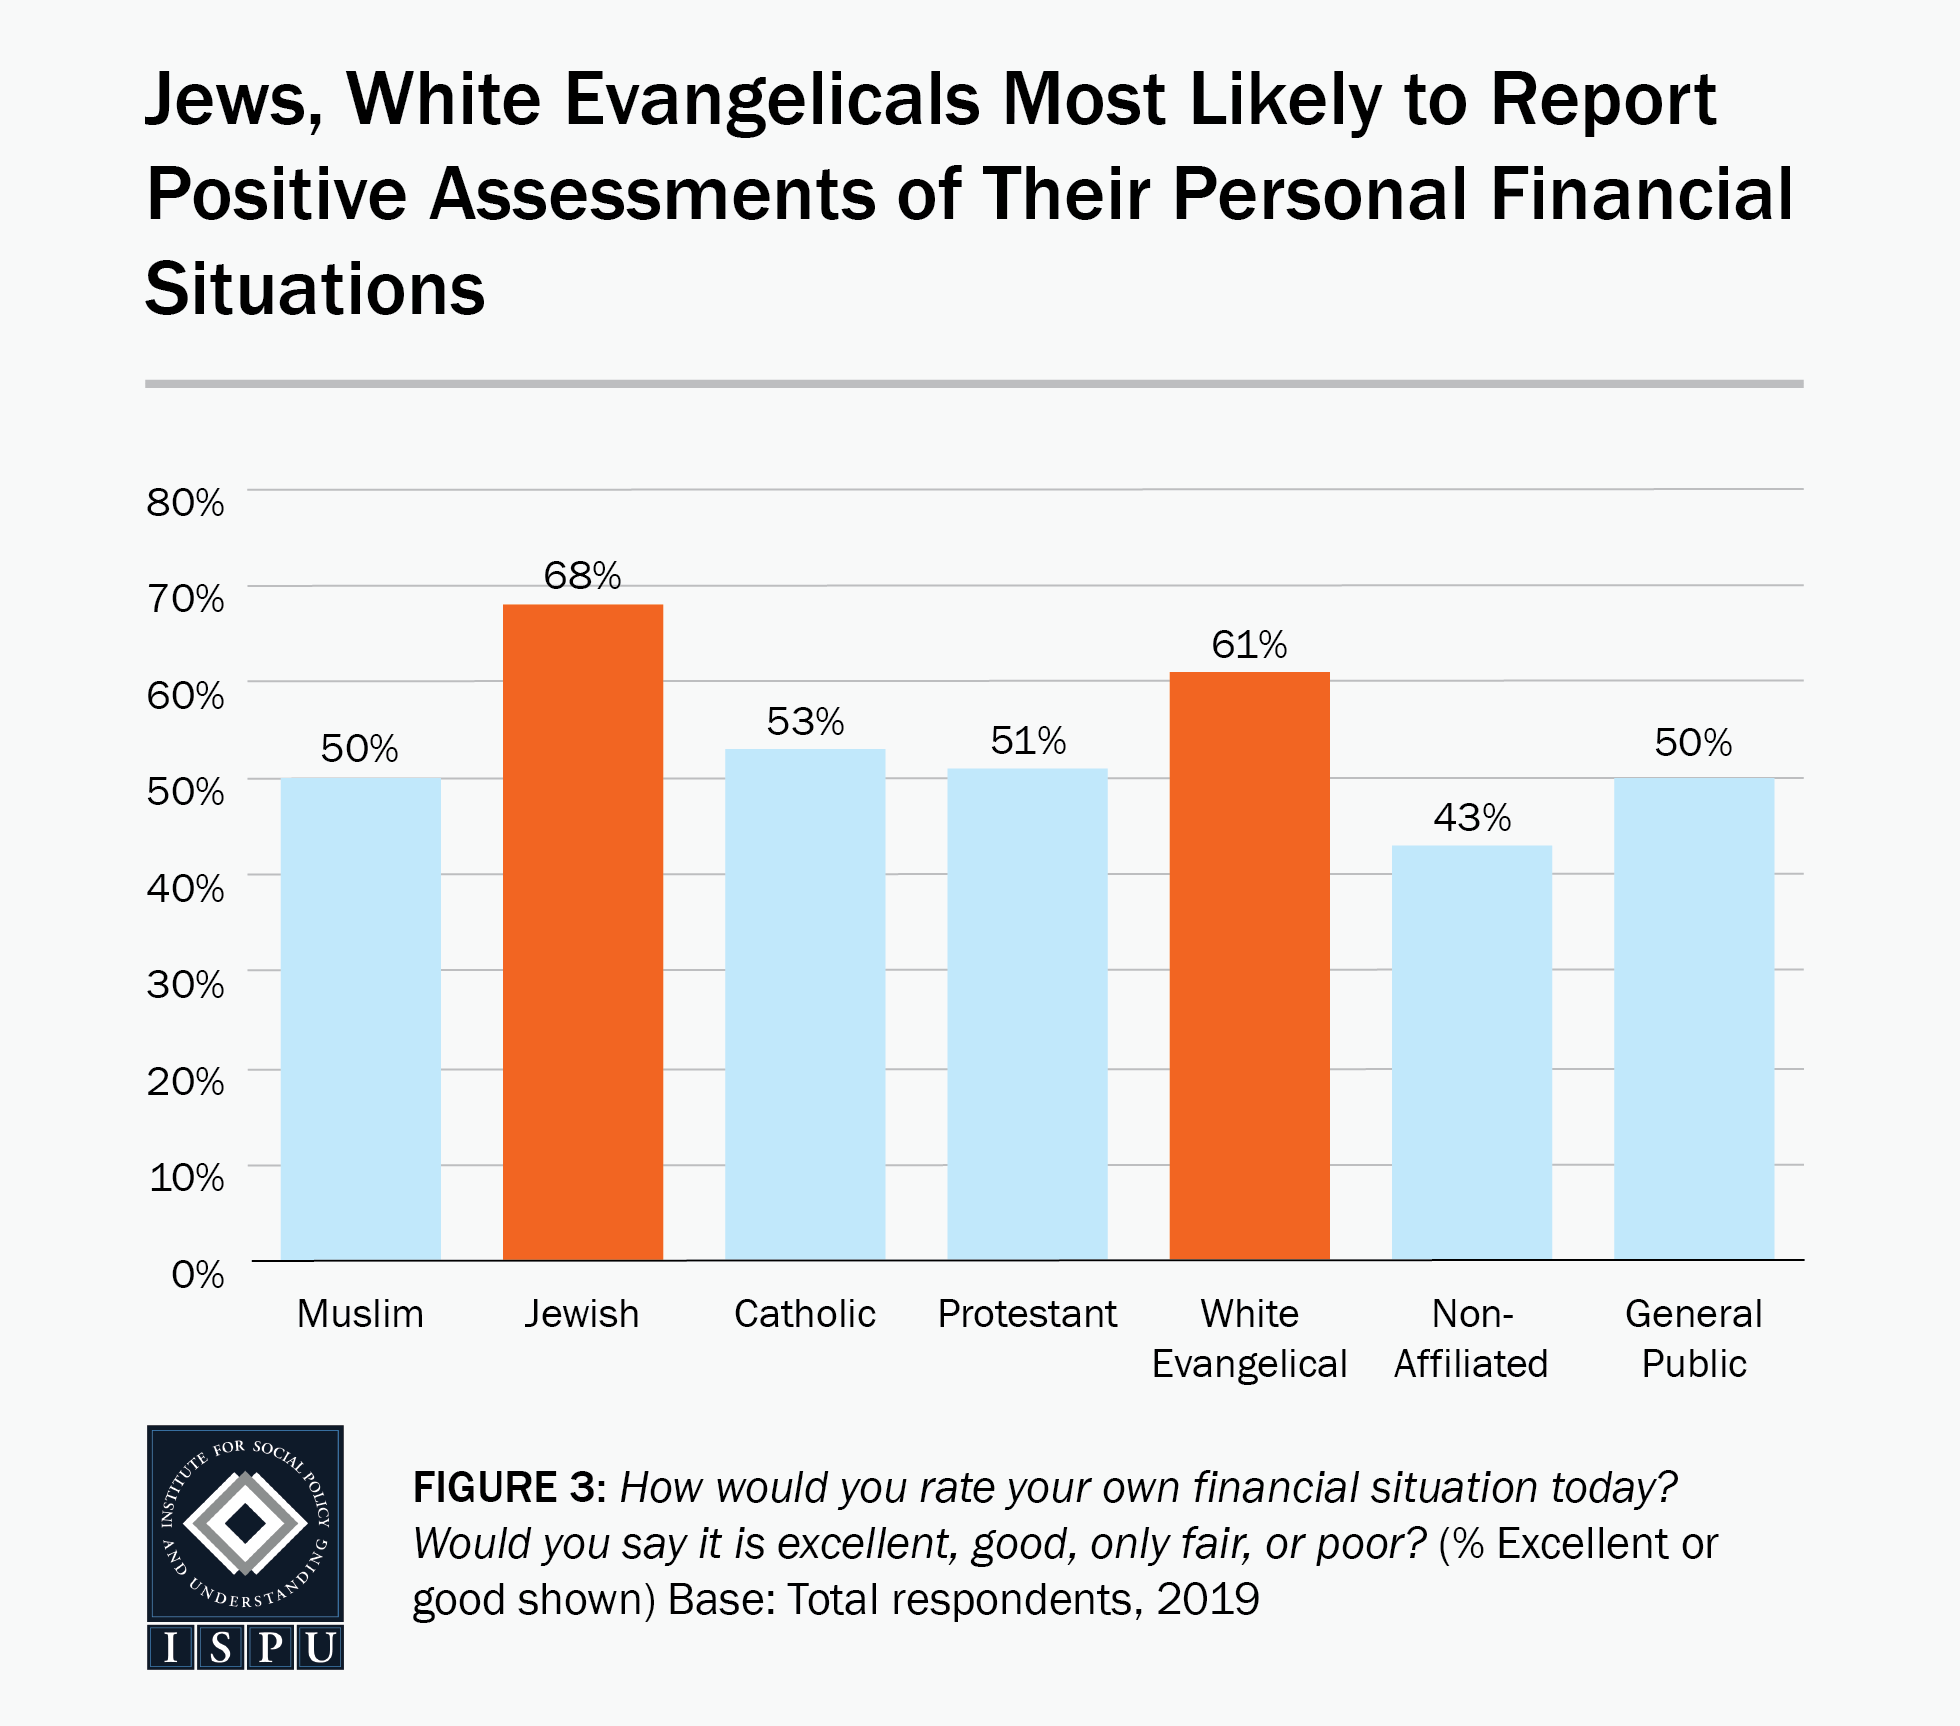 Figure 3: A bar graph showing that Jews and white Evangelicals are the most likely to report positive assessments of their personal financial situations